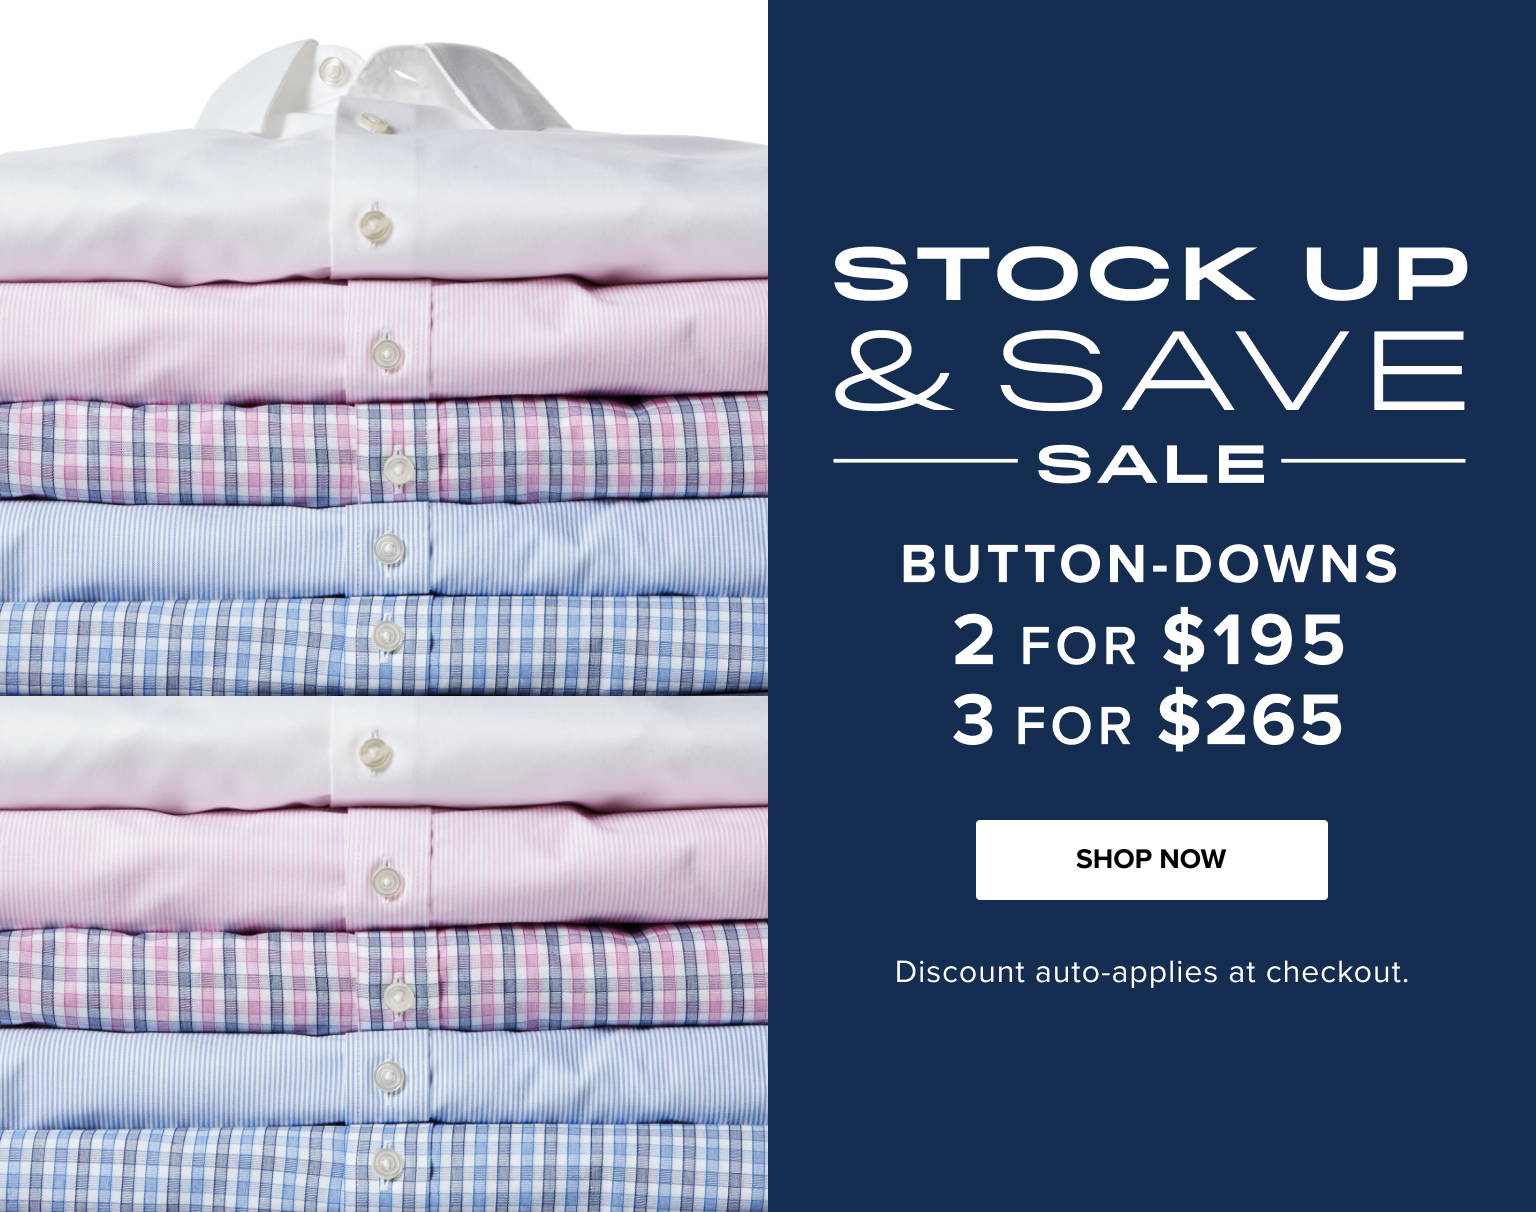 Stock up and save sale. Button-downs are 2 for $195. 3 for $265. Discount auto-applies at checkout.